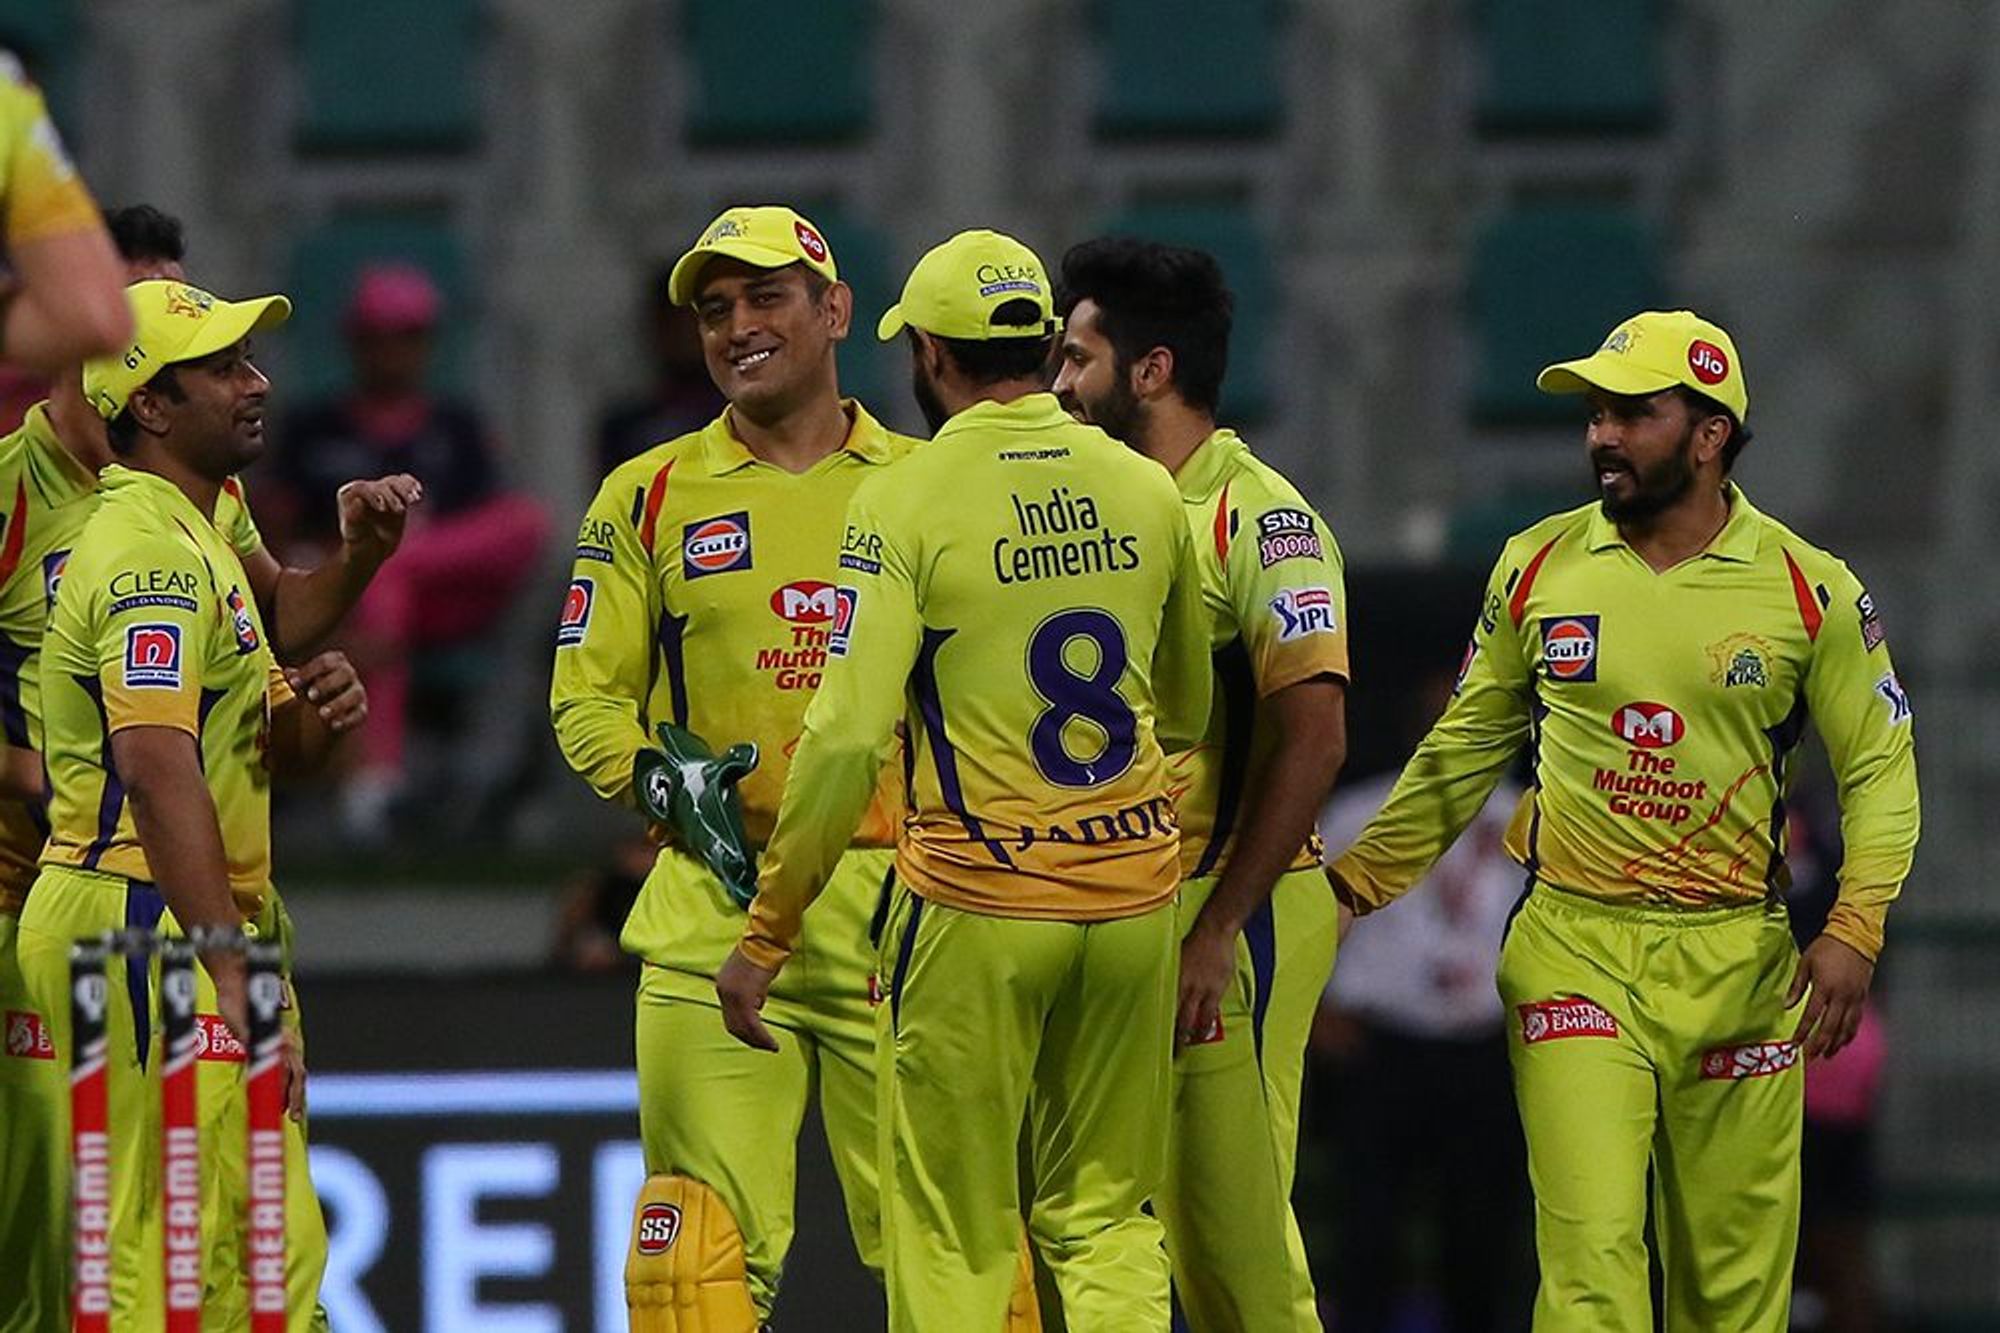 Reports | Three CSK members, including bowling coach L Balaji, test positive for Covid-19